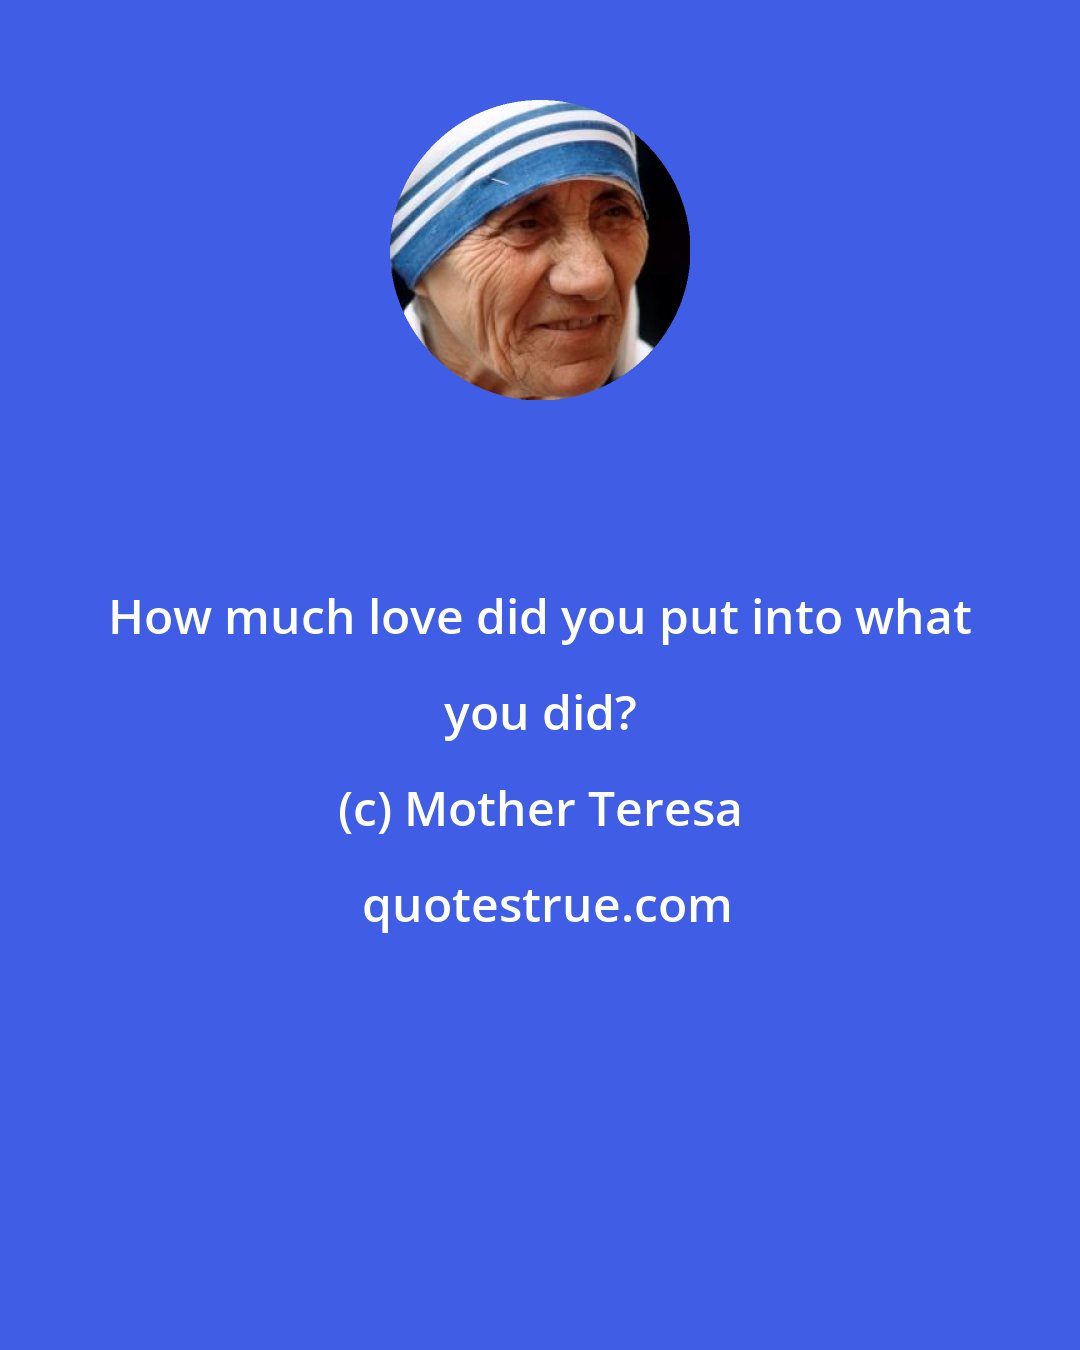 Mother Teresa: How much love did you put into what you did?